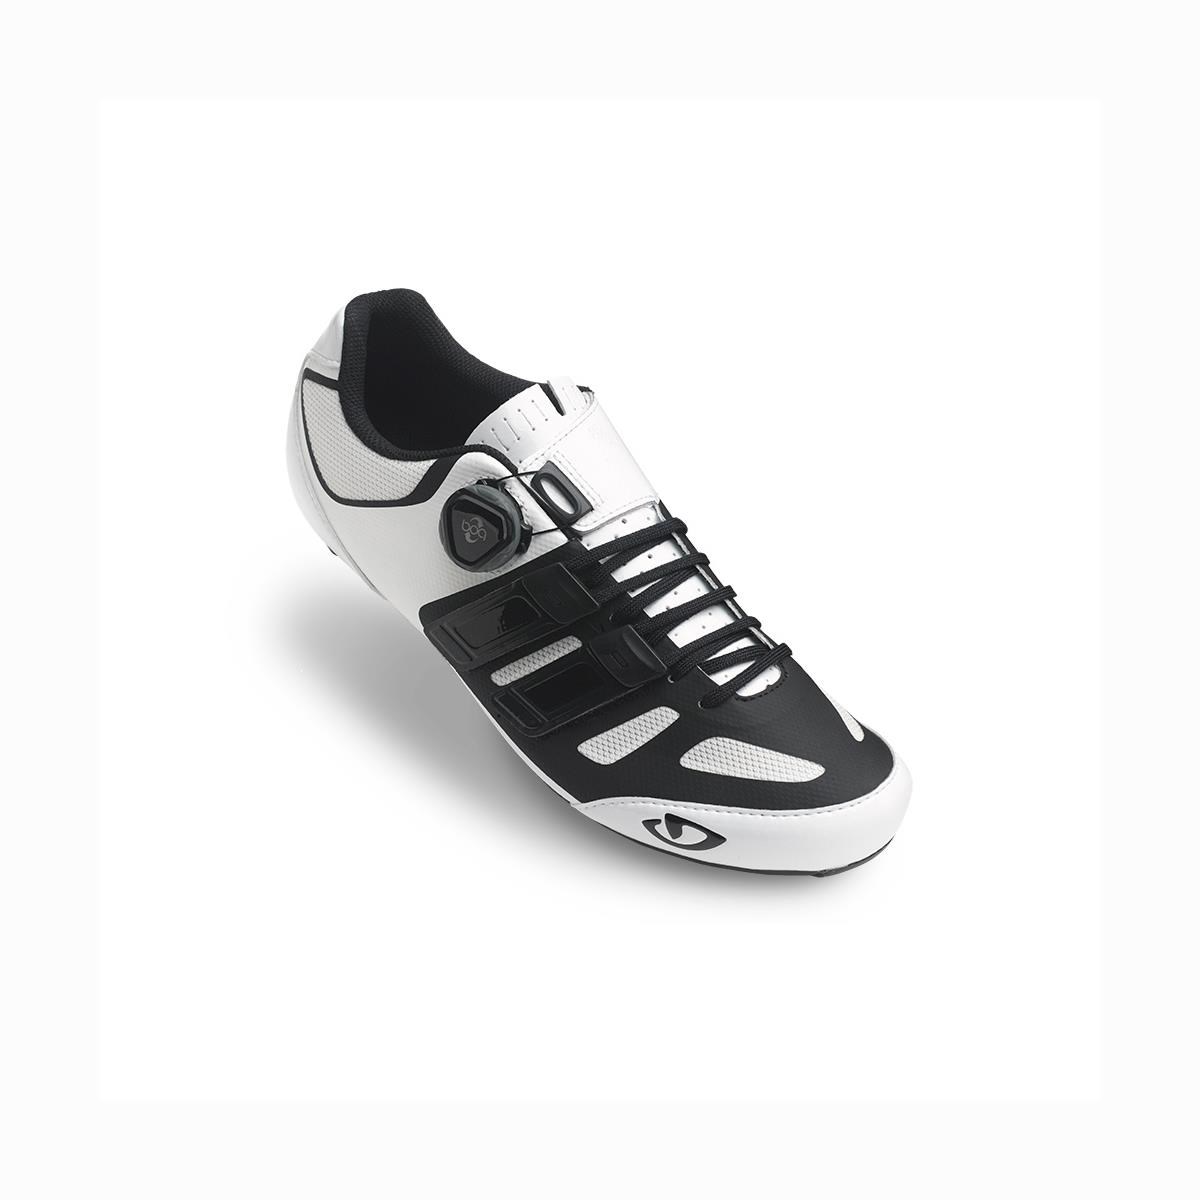 Giro Sentrie Techlace Road Cycling Shoes 2018 product image